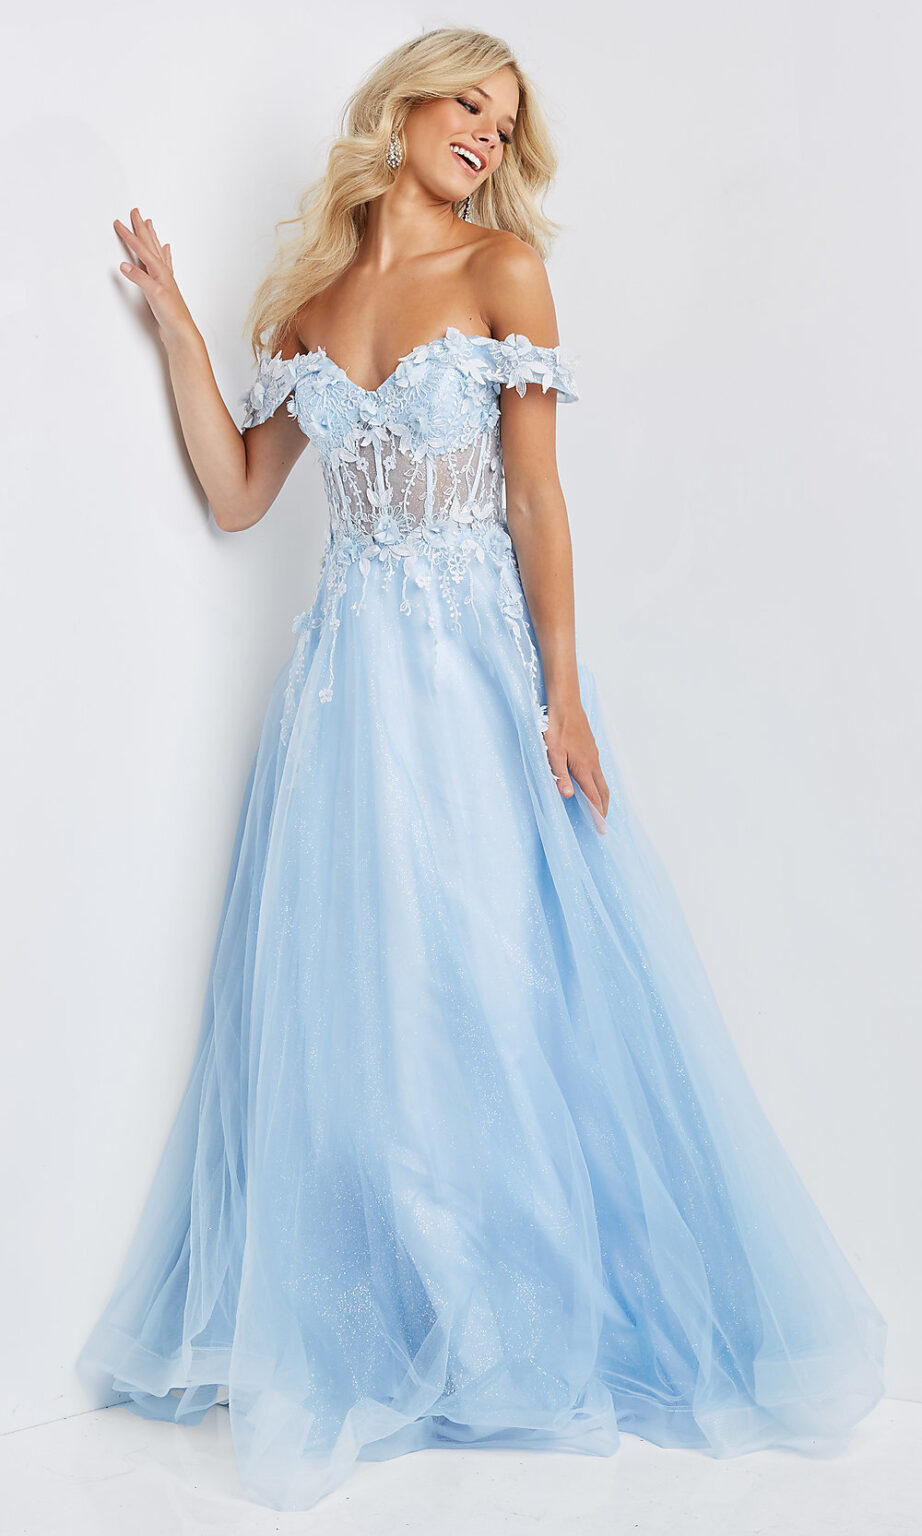 35+ Prom Dresses You Should Check Out Right Now